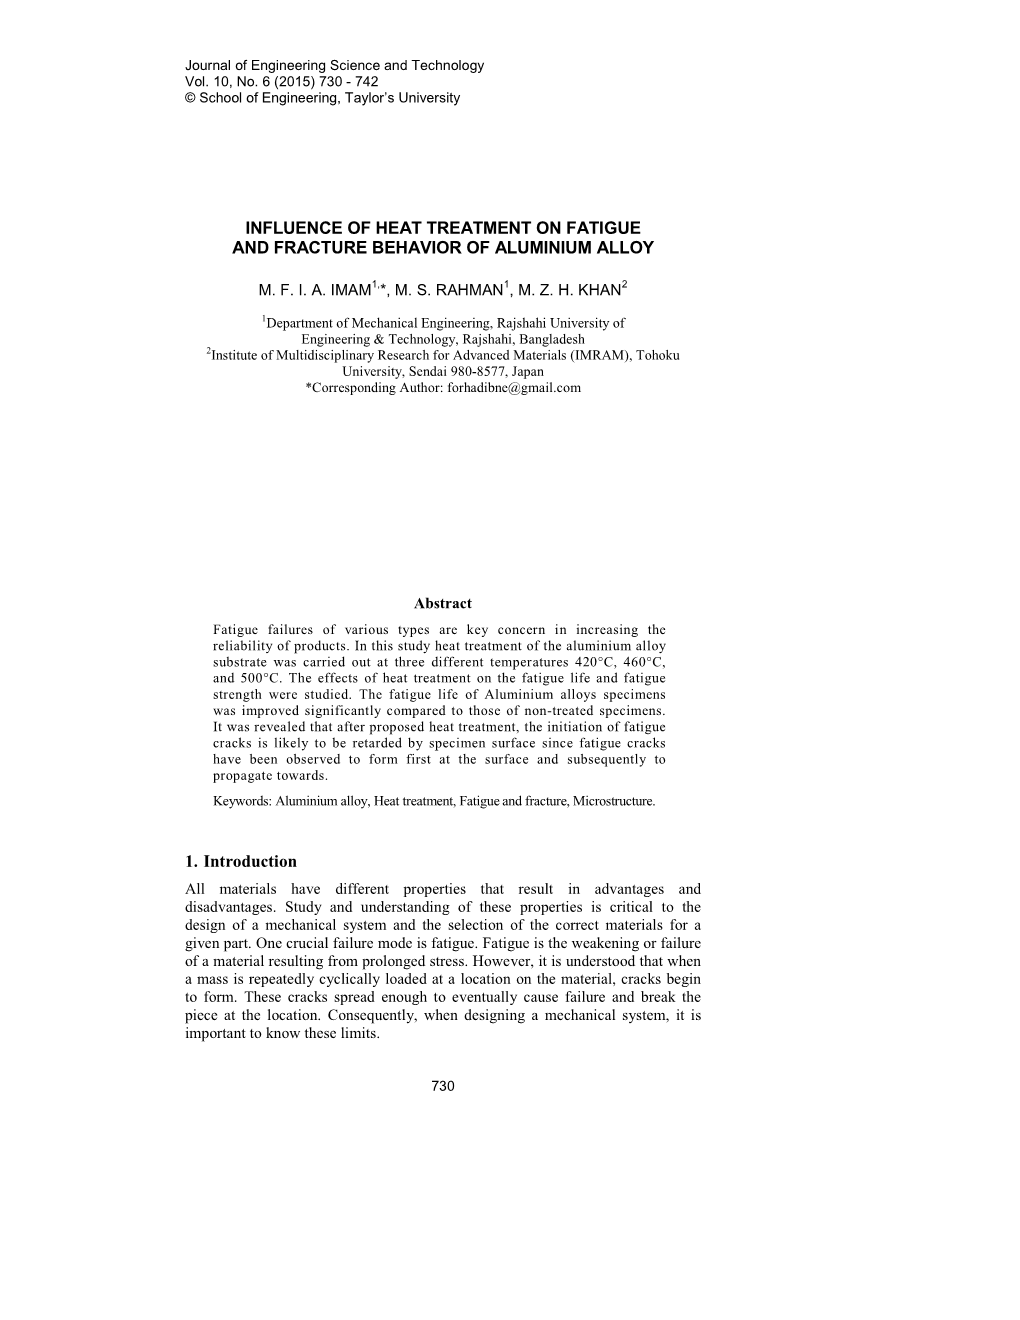 Influence of Heat Treatment on Fatigue and Fracture Behavior of Aluminium Alloy